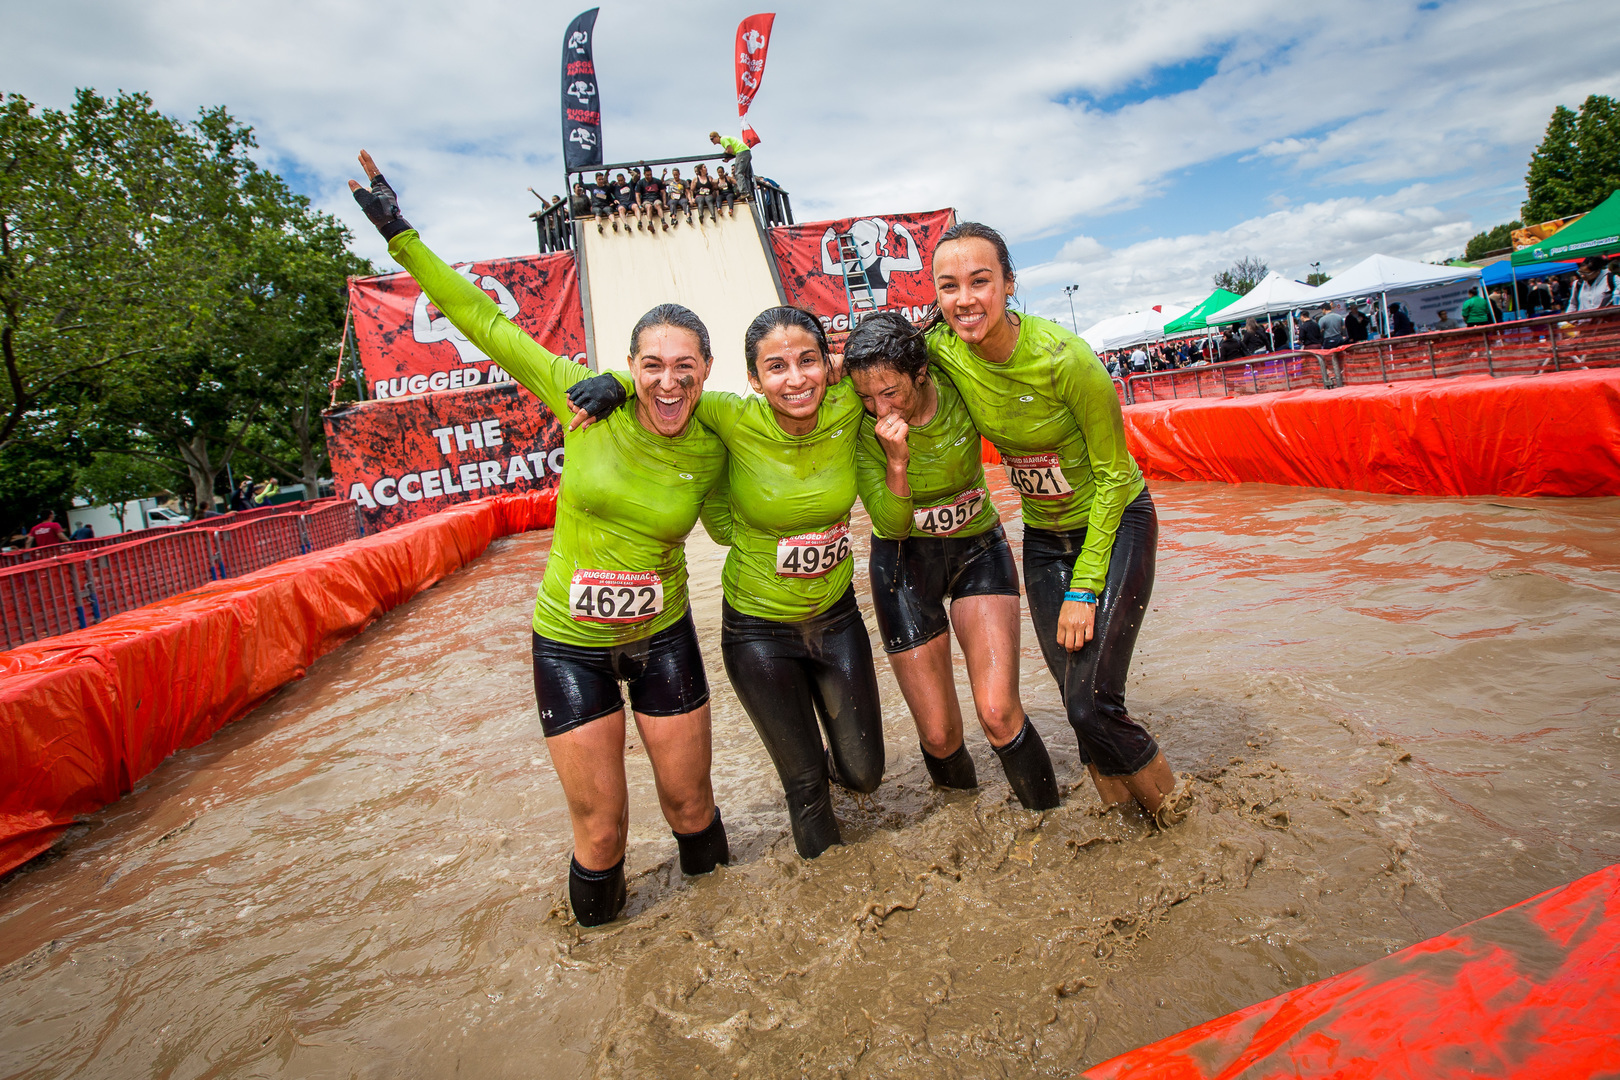 Rugged Maniac 5k Obstacle Race - New Jersey, Englishtown, New Jersey, United States